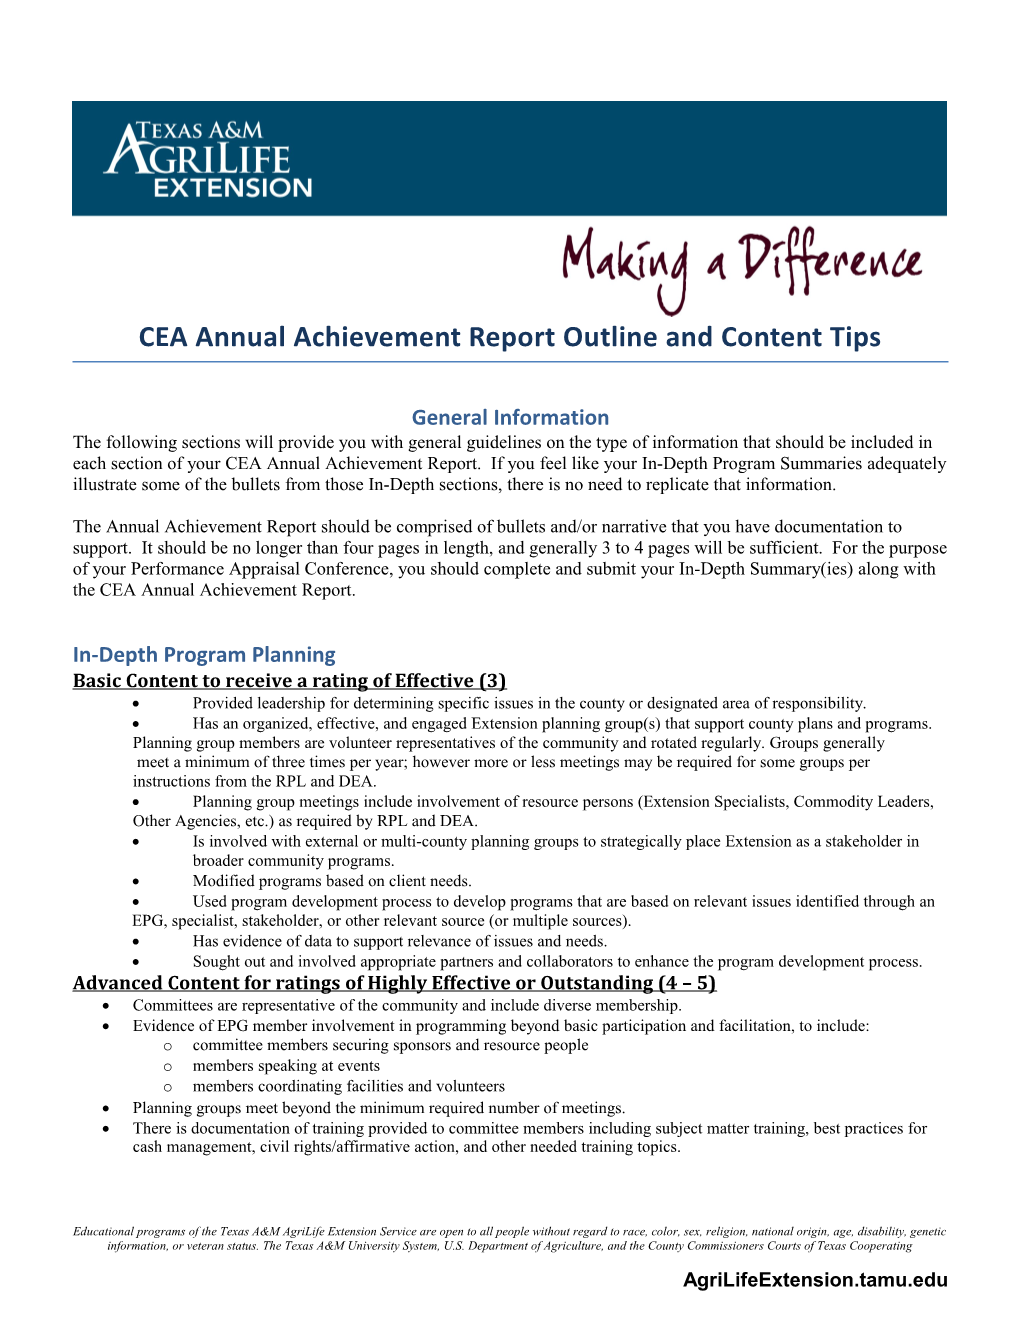 CEA Annual Achievement Report Outline and Content Tips